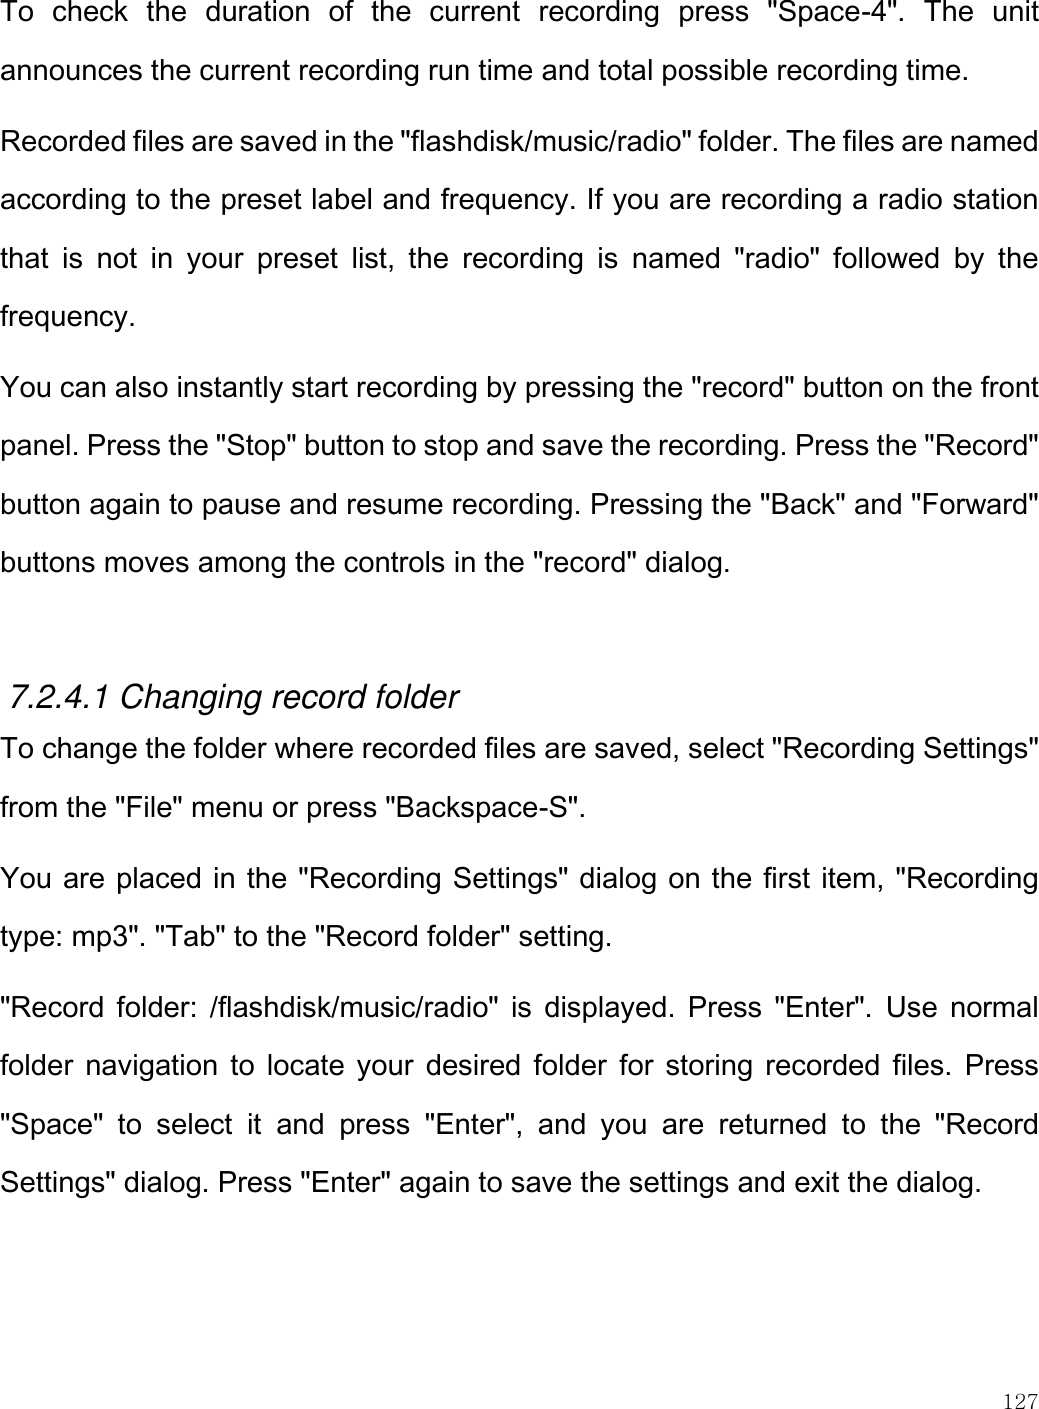    127  To  check  the  duration  of  the  current  recording  press  &quot;Space-4&quot;.  The  unit announces the current recording run time and total possible recording time.  Recorded files are saved in the &quot;flashdisk/music/radio&quot; folder. The files are named according to the preset label and frequency. If you are recording a radio station that  is  not  in  your  preset  list,  the  recording  is  named  &quot;radio&quot;  followed  by  the frequency.  You can also instantly start recording by pressing the &quot;record&quot; button on the front panel. Press the &quot;Stop&quot; button to stop and save the recording. Press the &quot;Record&quot; button again to pause and resume recording. Pressing the &quot;Back&quot; and &quot;Forward&quot; buttons moves among the controls in the &quot;record&quot; dialog.   7.2.4.1 Changing record folder To change the folder where recorded files are saved, select &quot;Recording Settings&quot; from the &quot;File&quot; menu or press &quot;Backspace-S&quot;. You are placed in the &quot;Recording Settings&quot; dialog on the first item, &quot;Recording type: mp3&quot;. &quot;Tab&quot; to the &quot;Record folder&quot; setting. &quot;Record folder: /flashdisk/music/radio&quot; is  displayed. Press &quot;Enter&quot;.  Use  normal folder  navigation to locate your  desired  folder  for storing recorded files.  Press &quot;Space&quot;  to  select  it  and  press  &quot;Enter&quot;,  and  you  are  returned  to  the  &quot;Record Settings&quot; dialog. Press &quot;Enter&quot; again to save the settings and exit the dialog.  